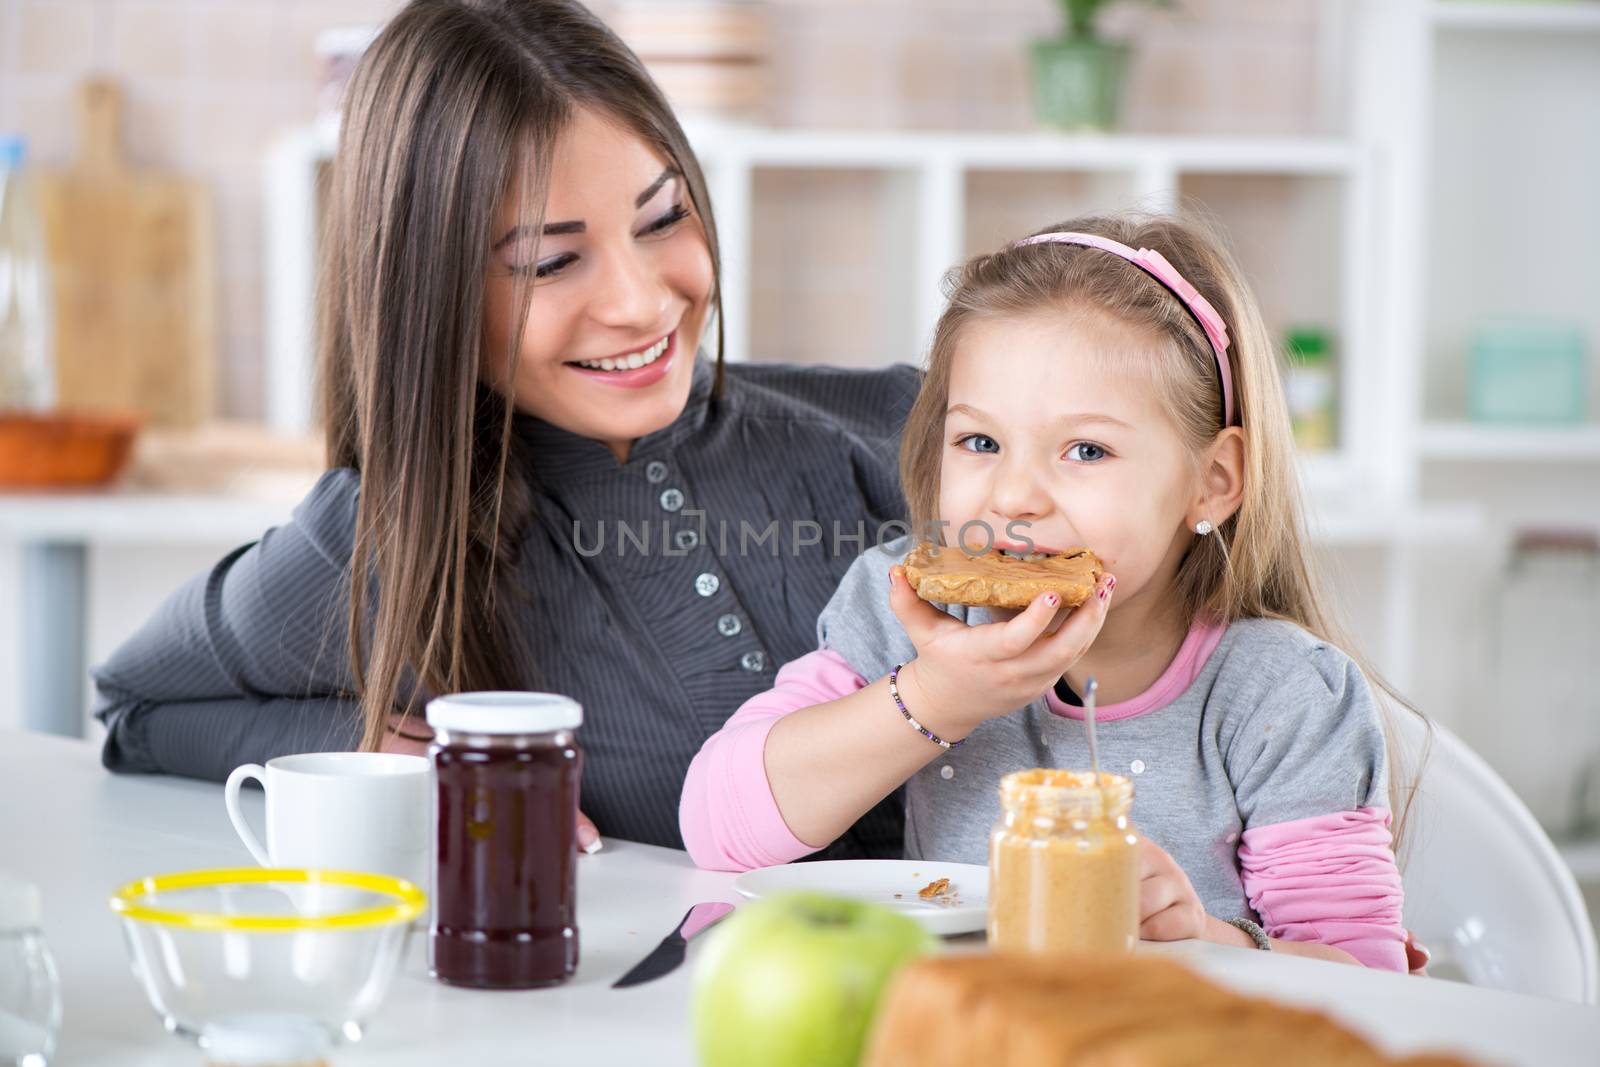 Mother and daughter breakfast in the kitchen. Cute little girl eats bread with peanut butter.